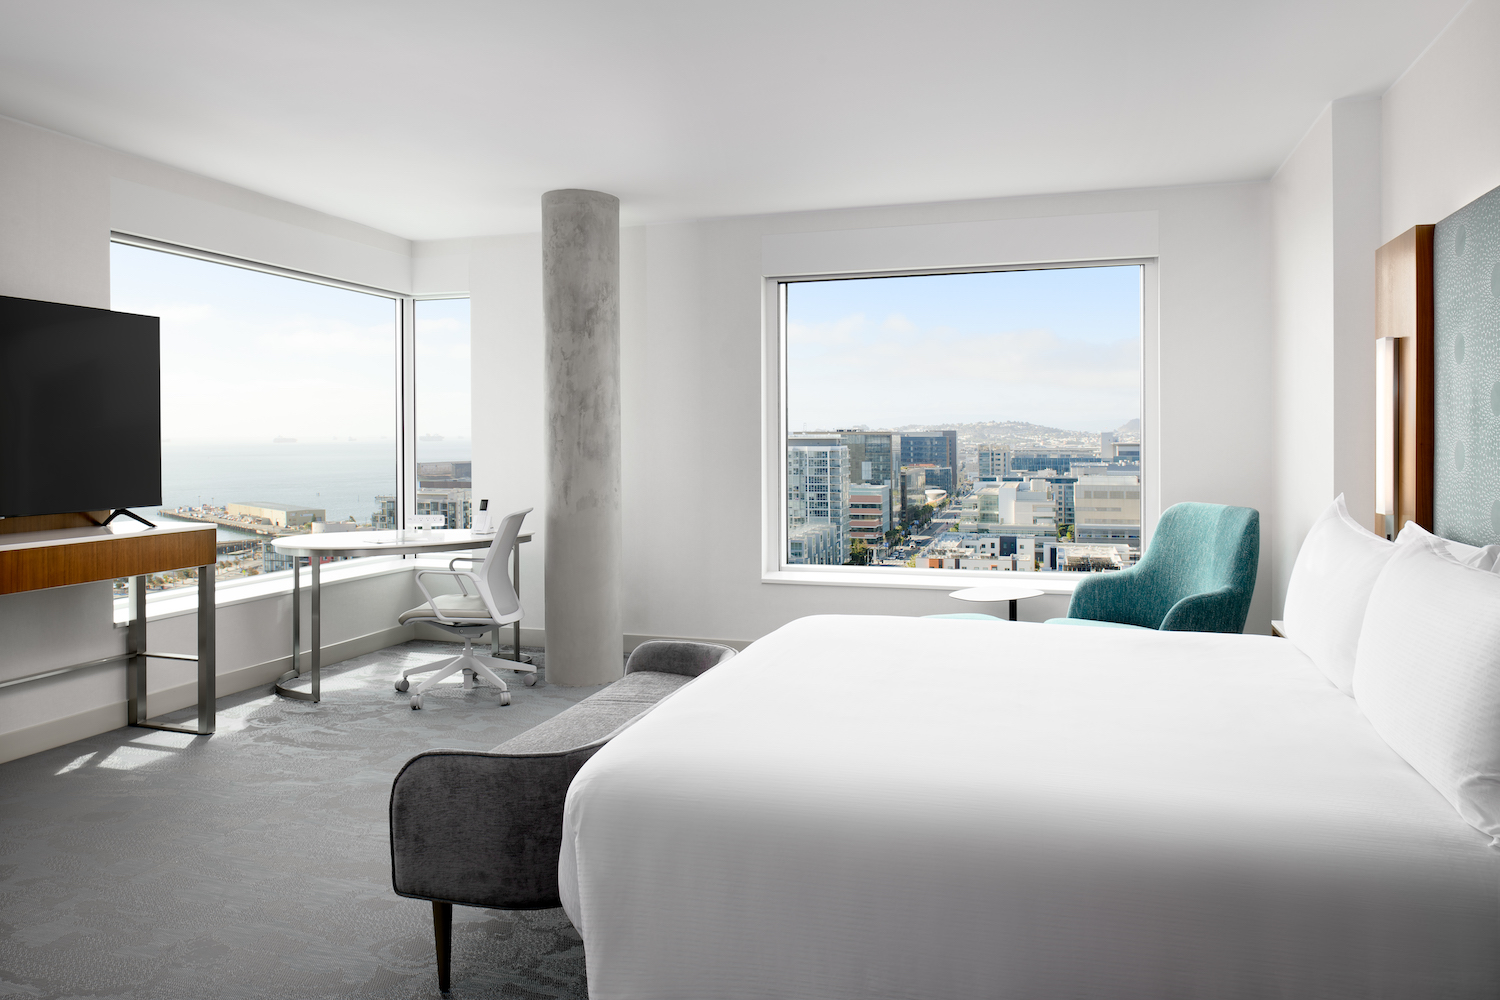 Bedroom with city view out of the window at LUMA Hotel San Francisco